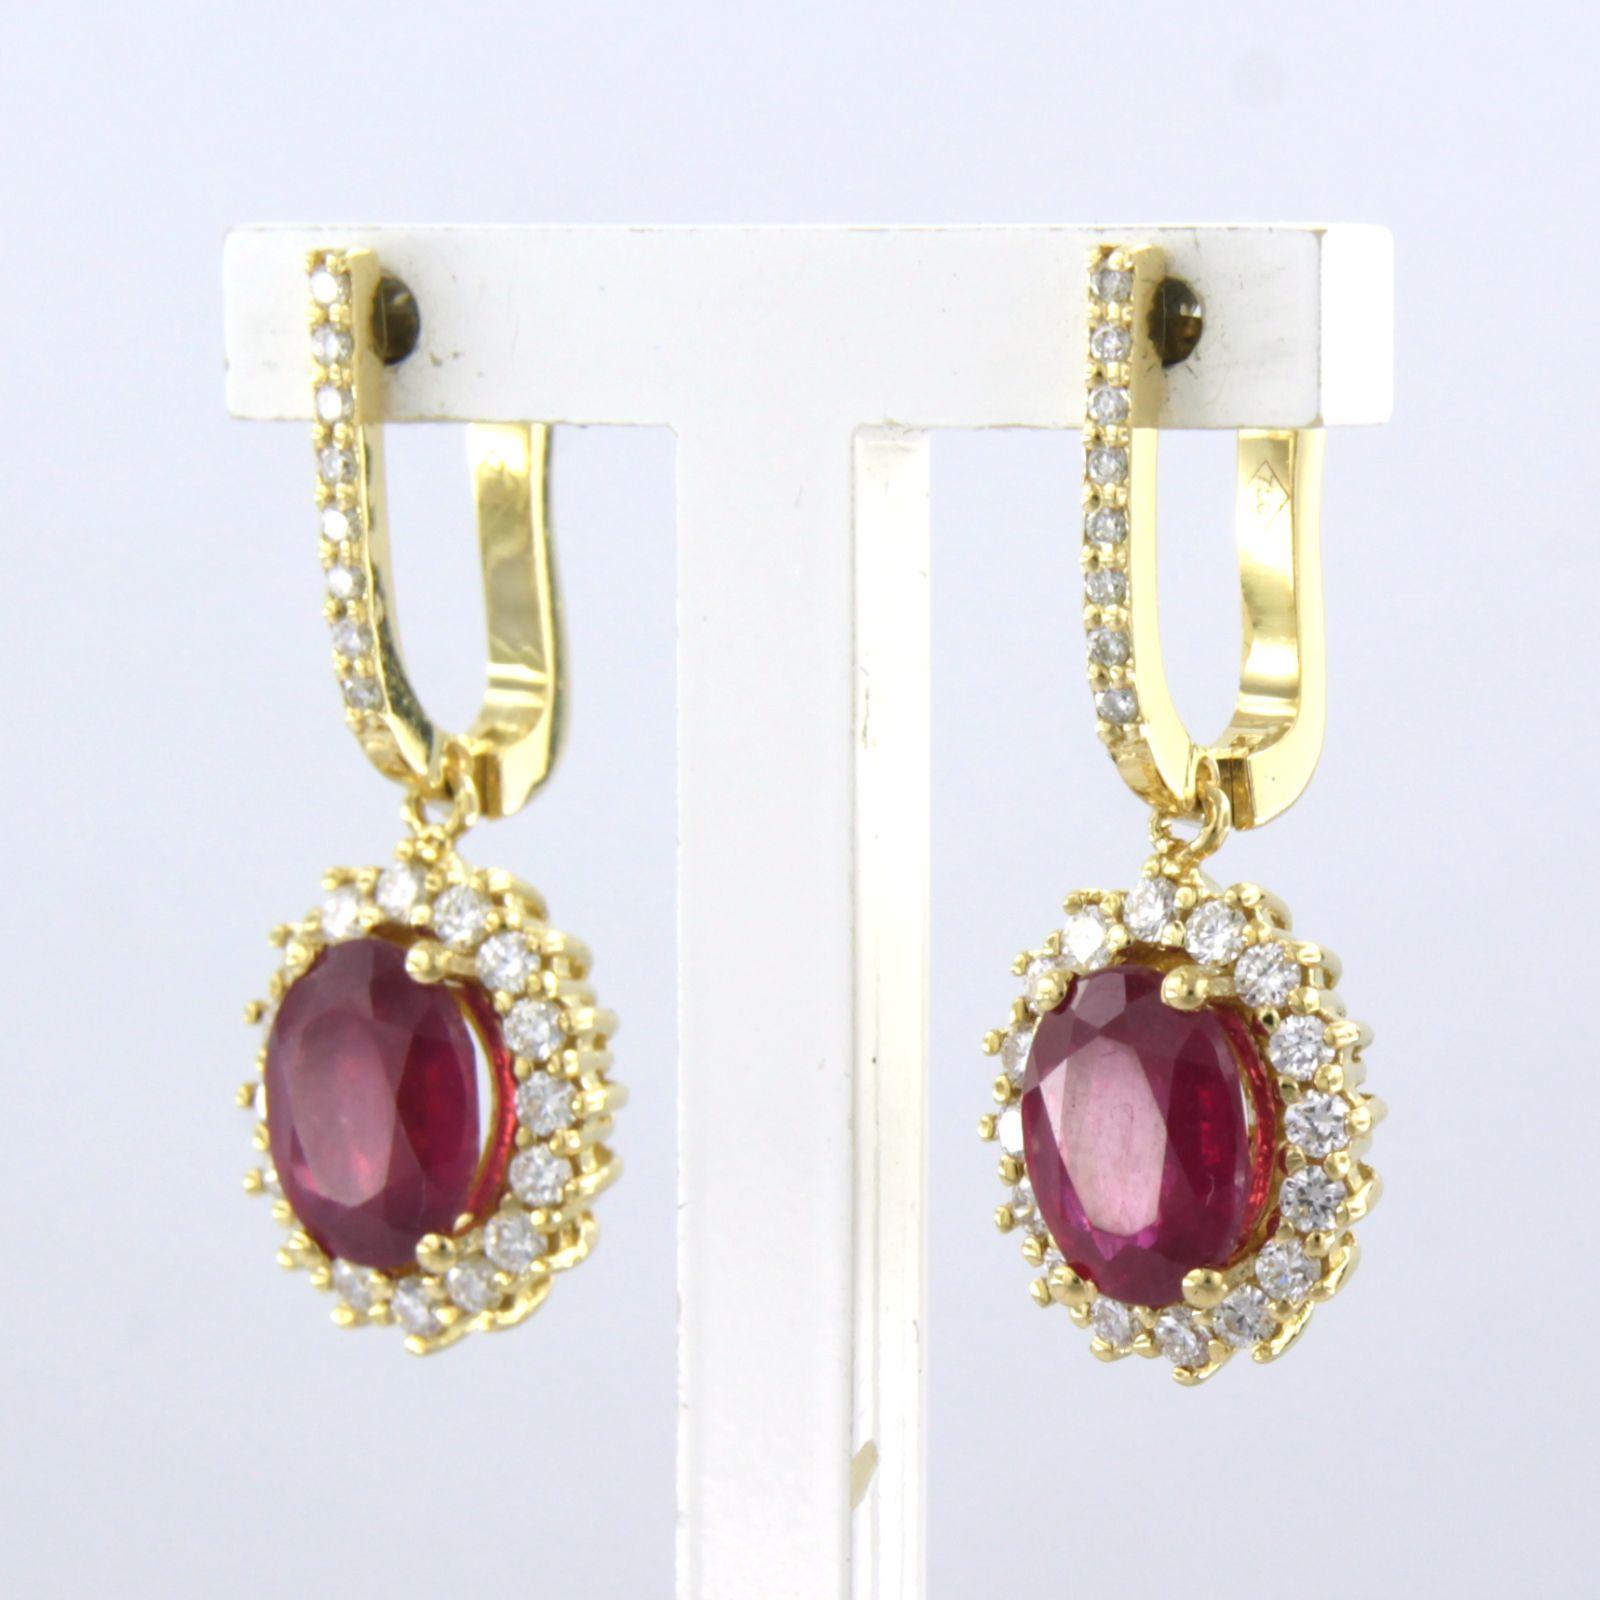 Brilliant Cut 18k gold earrings with ruby to. 3.40ct and brilliant cut diamonds up to.0.64ct For Sale